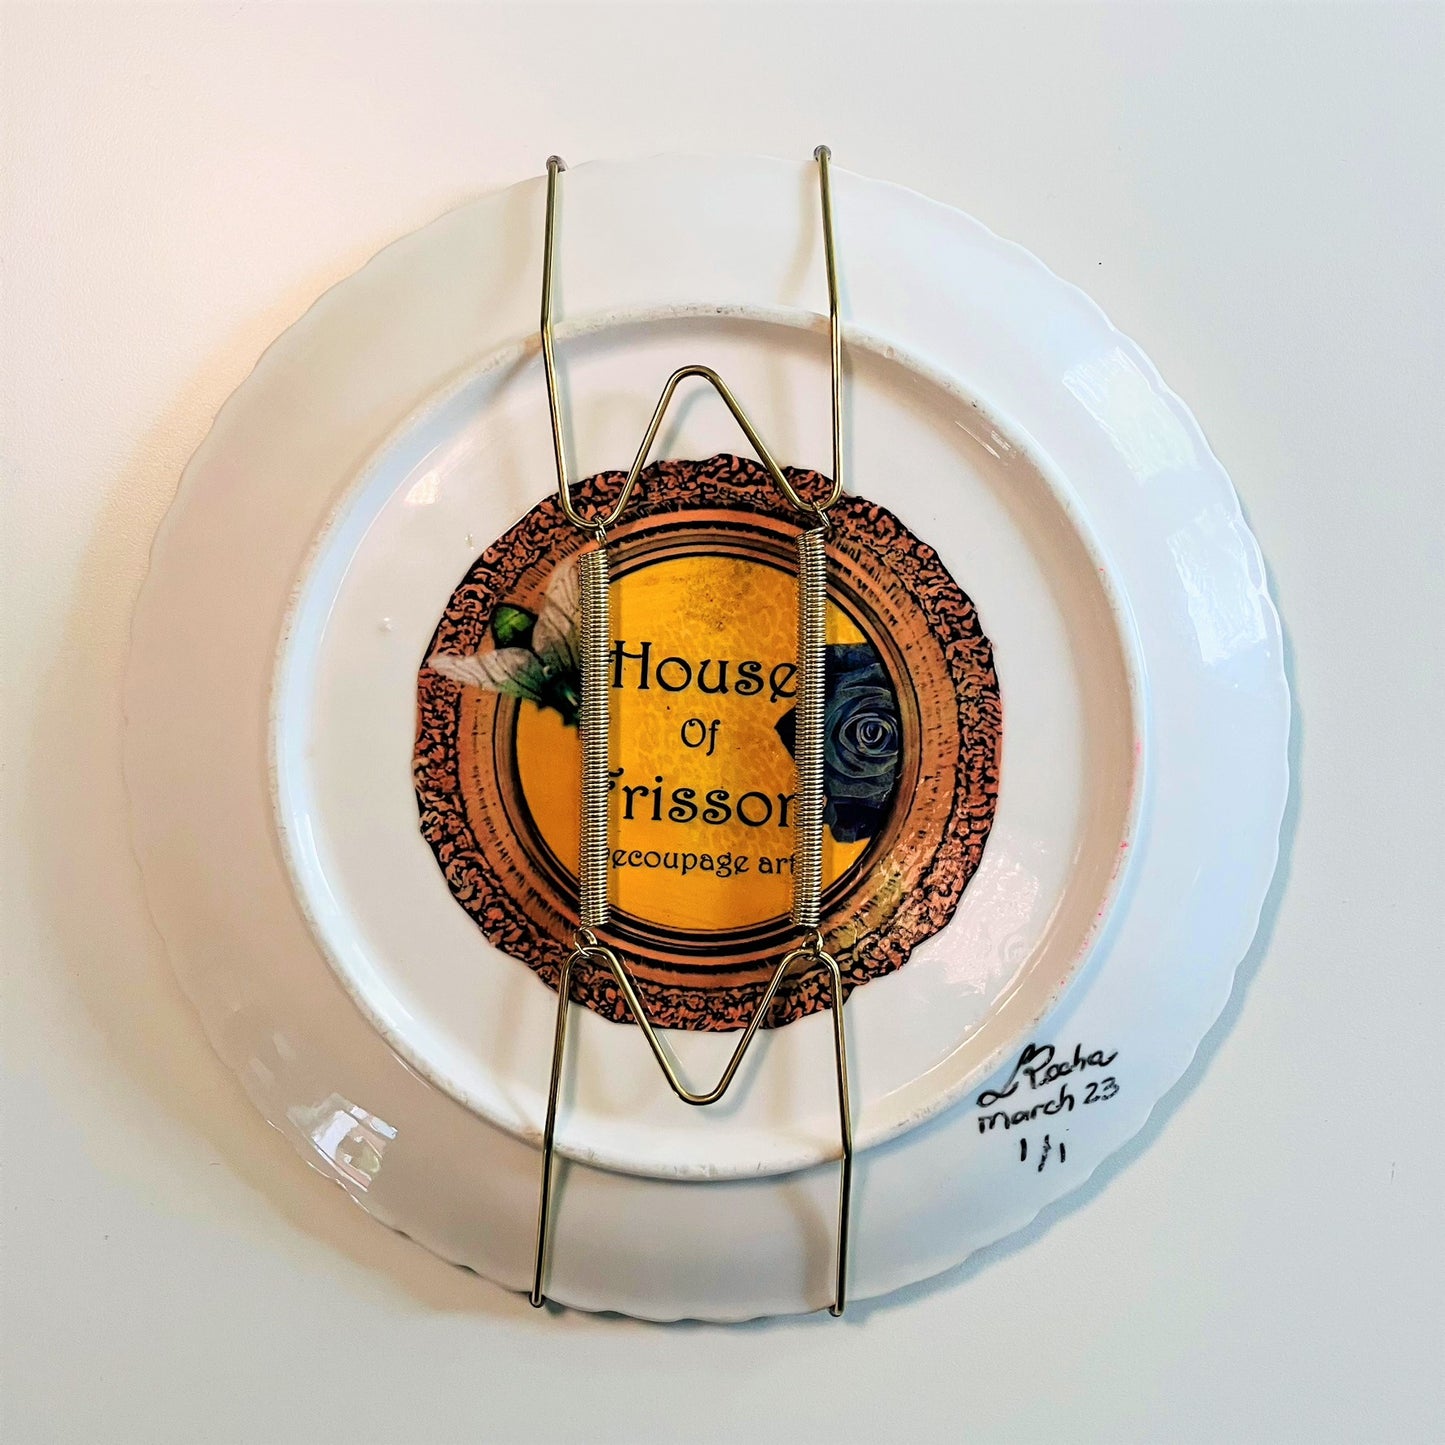 Neutral Upcycled Wall Plate - "Nothing Scares Me More Than People" - by House of Frisson